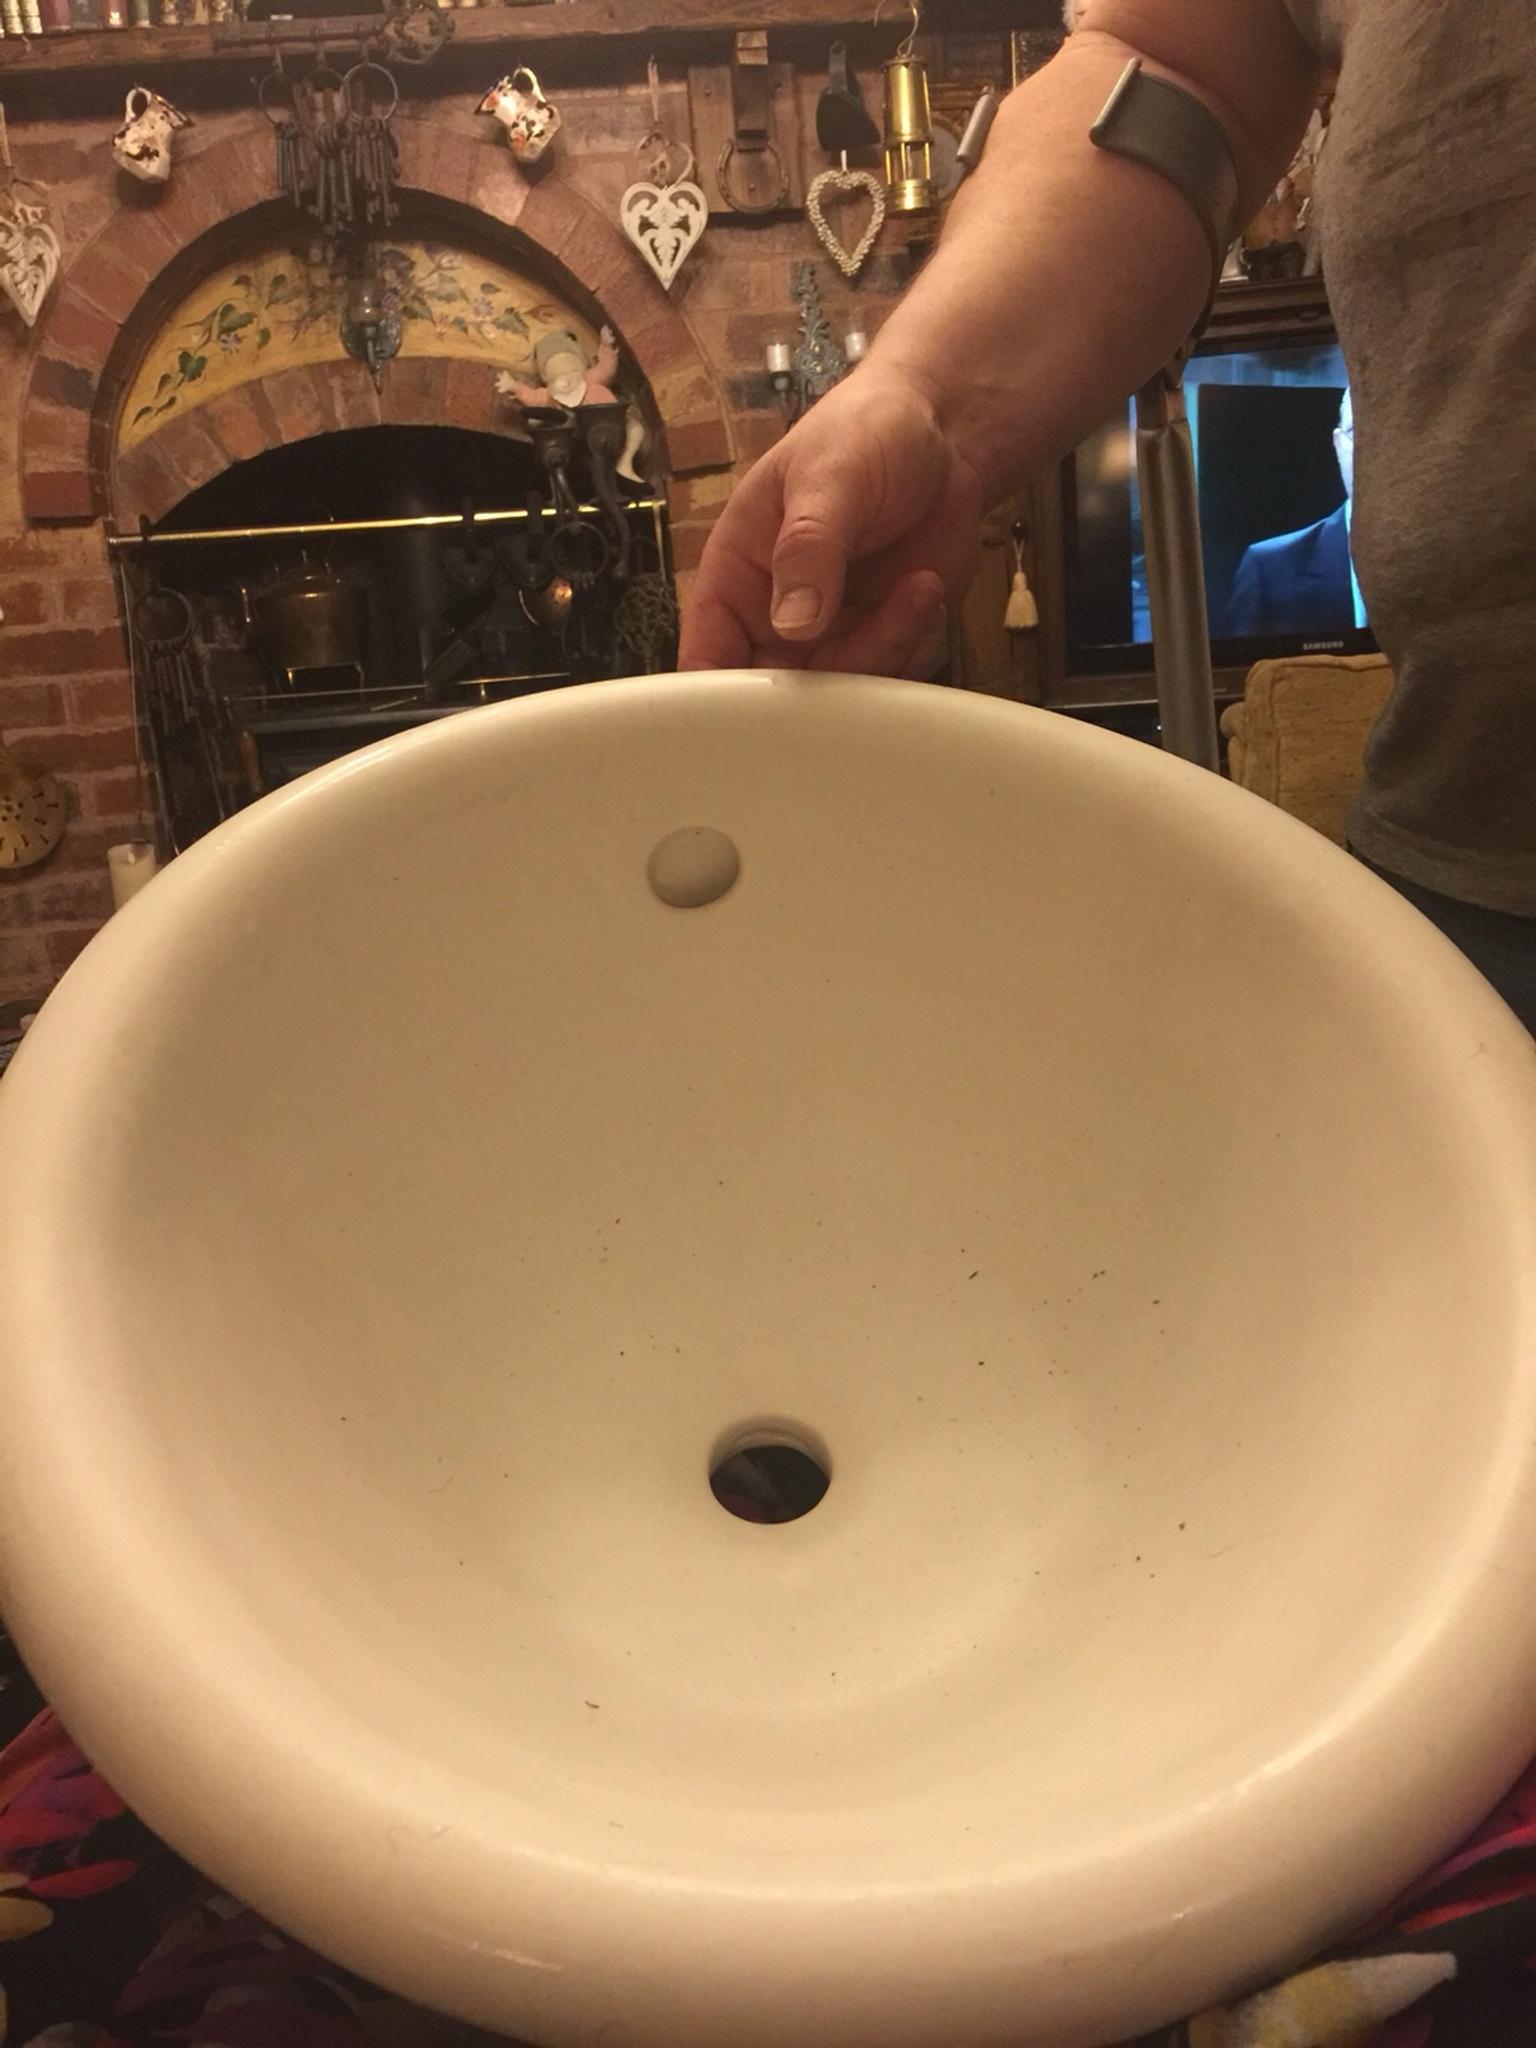 Round China Wash Basin In Dy3 Dudley For Free For Sale Shpock